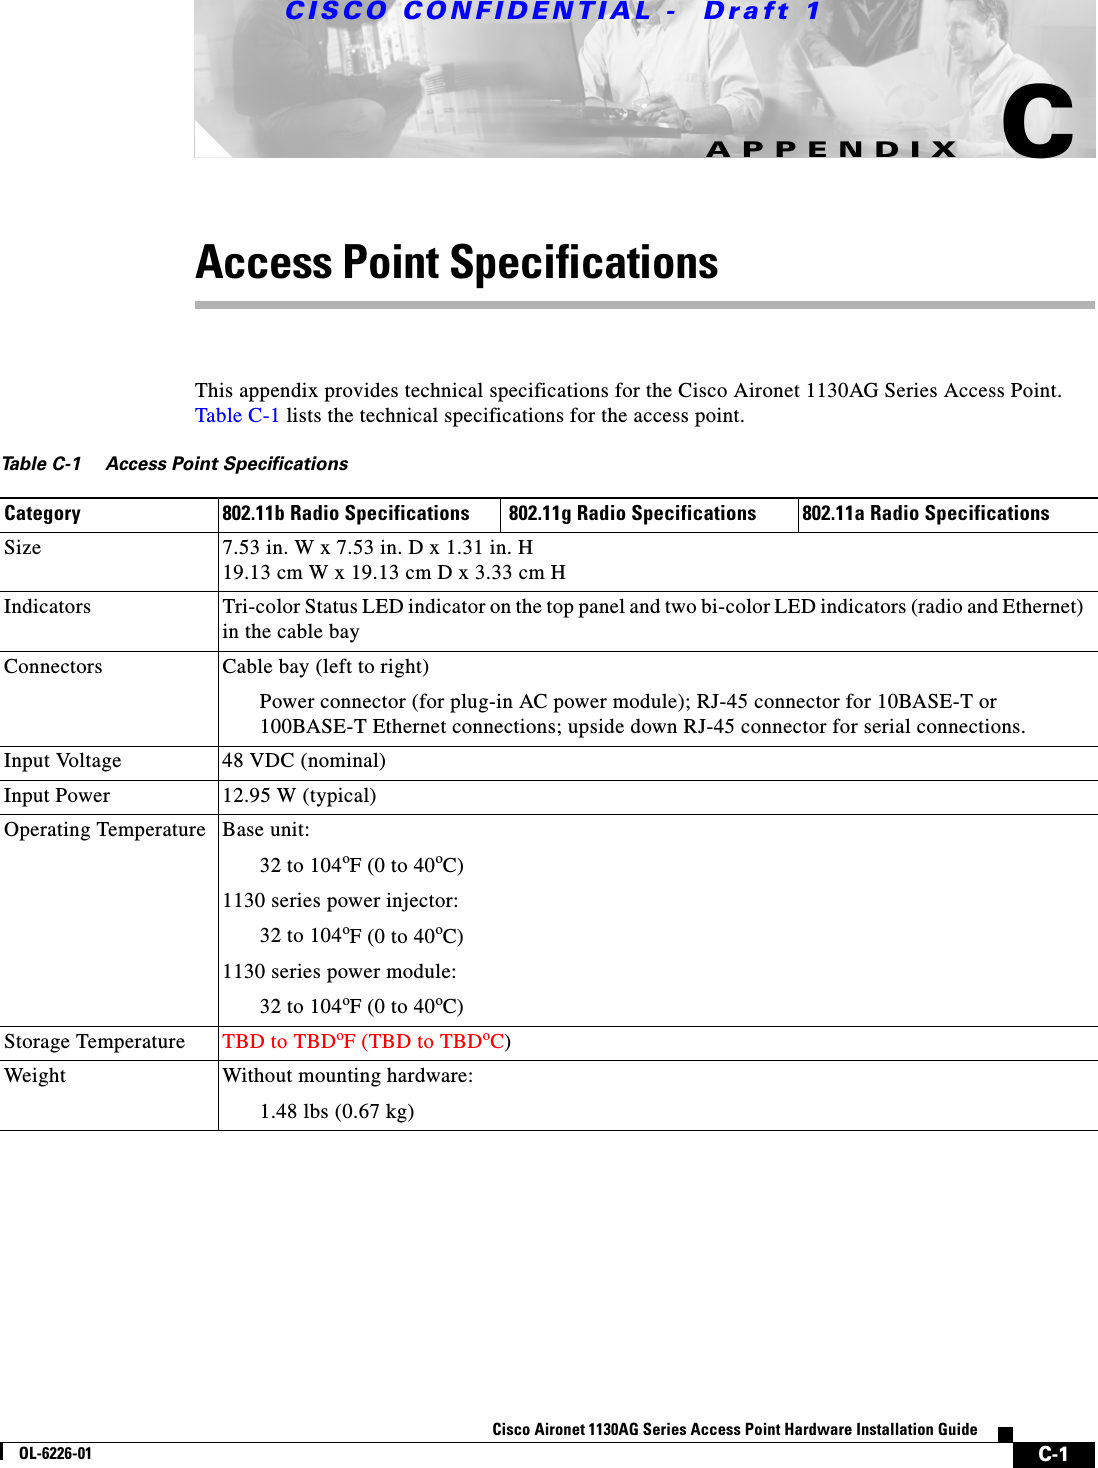  CISCO CONFIDENTIAL -  Draft 1C-1Cisco Aironet 1130AG Series Access Point Hardware Installation GuideOL-6226-01APPENDIXCAccess Point Specifications This appendix provides technical specifications for the Cisco Aironet 1130AG Series Access Point. Table C-1 lists the technical specifications for the access point. Table C-1 Access Point SpecificationsCategory 802.11b Radio Specifications  802.11g Radio Specifications 802.11a Radio SpecificationsSize 7.53 in. W x 7.53 in. D x 1.31 in. H19.13 cm W x 19.13 cm D x 3.33 cm H Indicators Tri-color Status LED indicator on the top panel and two bi-color LED indicators (radio and Ethernet) in the cable bayConnectors Cable bay (left to right)Power connector (for plug-in AC power module); RJ-45 connector for 10BASE-T or 100BASE-T Ethernet connections; upside down RJ-45 connector for serial connections.Input Voltage  48 VDC (nominal)Input Power 12.95 W (typical)Operating Temperature Base unit:32 to 104oF (0 to 40oC) 1130 series power injector:32 to 104oF (0 to 40oC)1130 series power module:32 to 104oF (0 to 40oC)Storage Temperature  TBD to TBDoF (TBD to TBDoC) Weight Without mounting hardware:1.48 lbs (0.67 kg) 